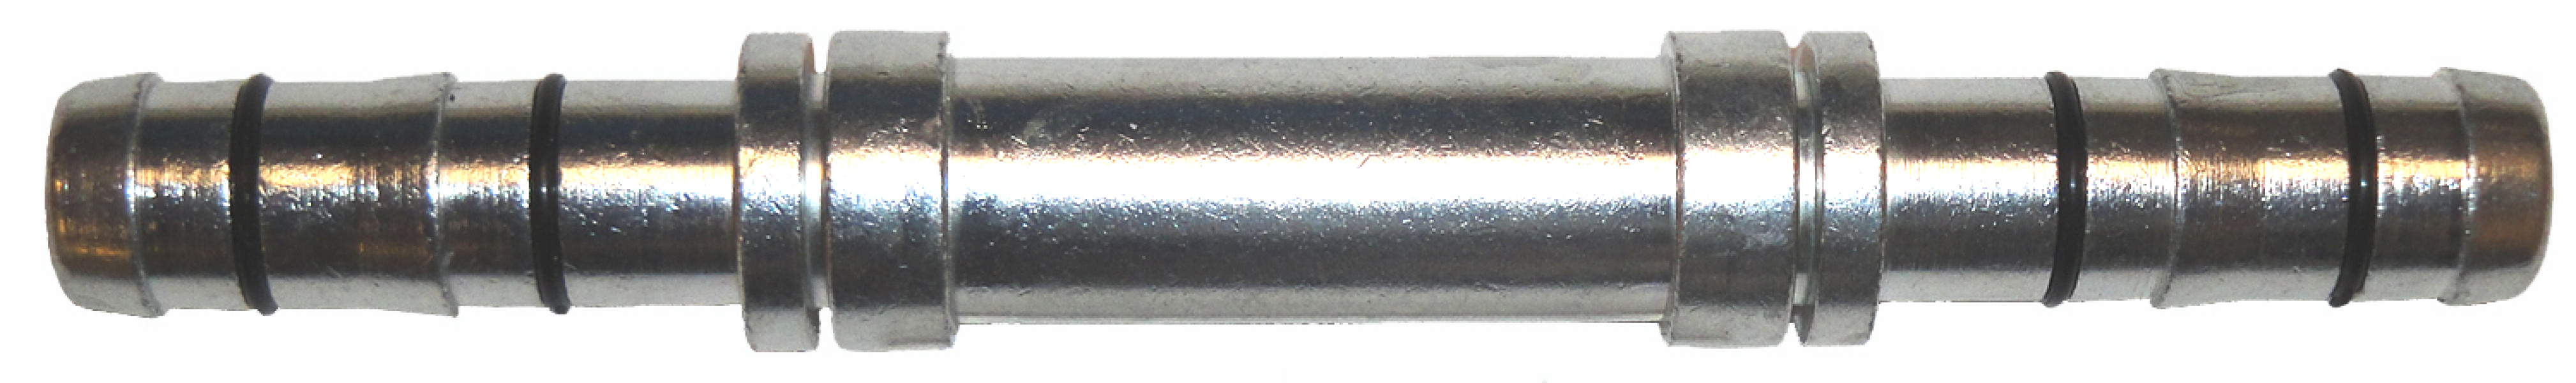 Image of A/C Refrigerant Hose Fitting from Sunair. Part number: FF14252